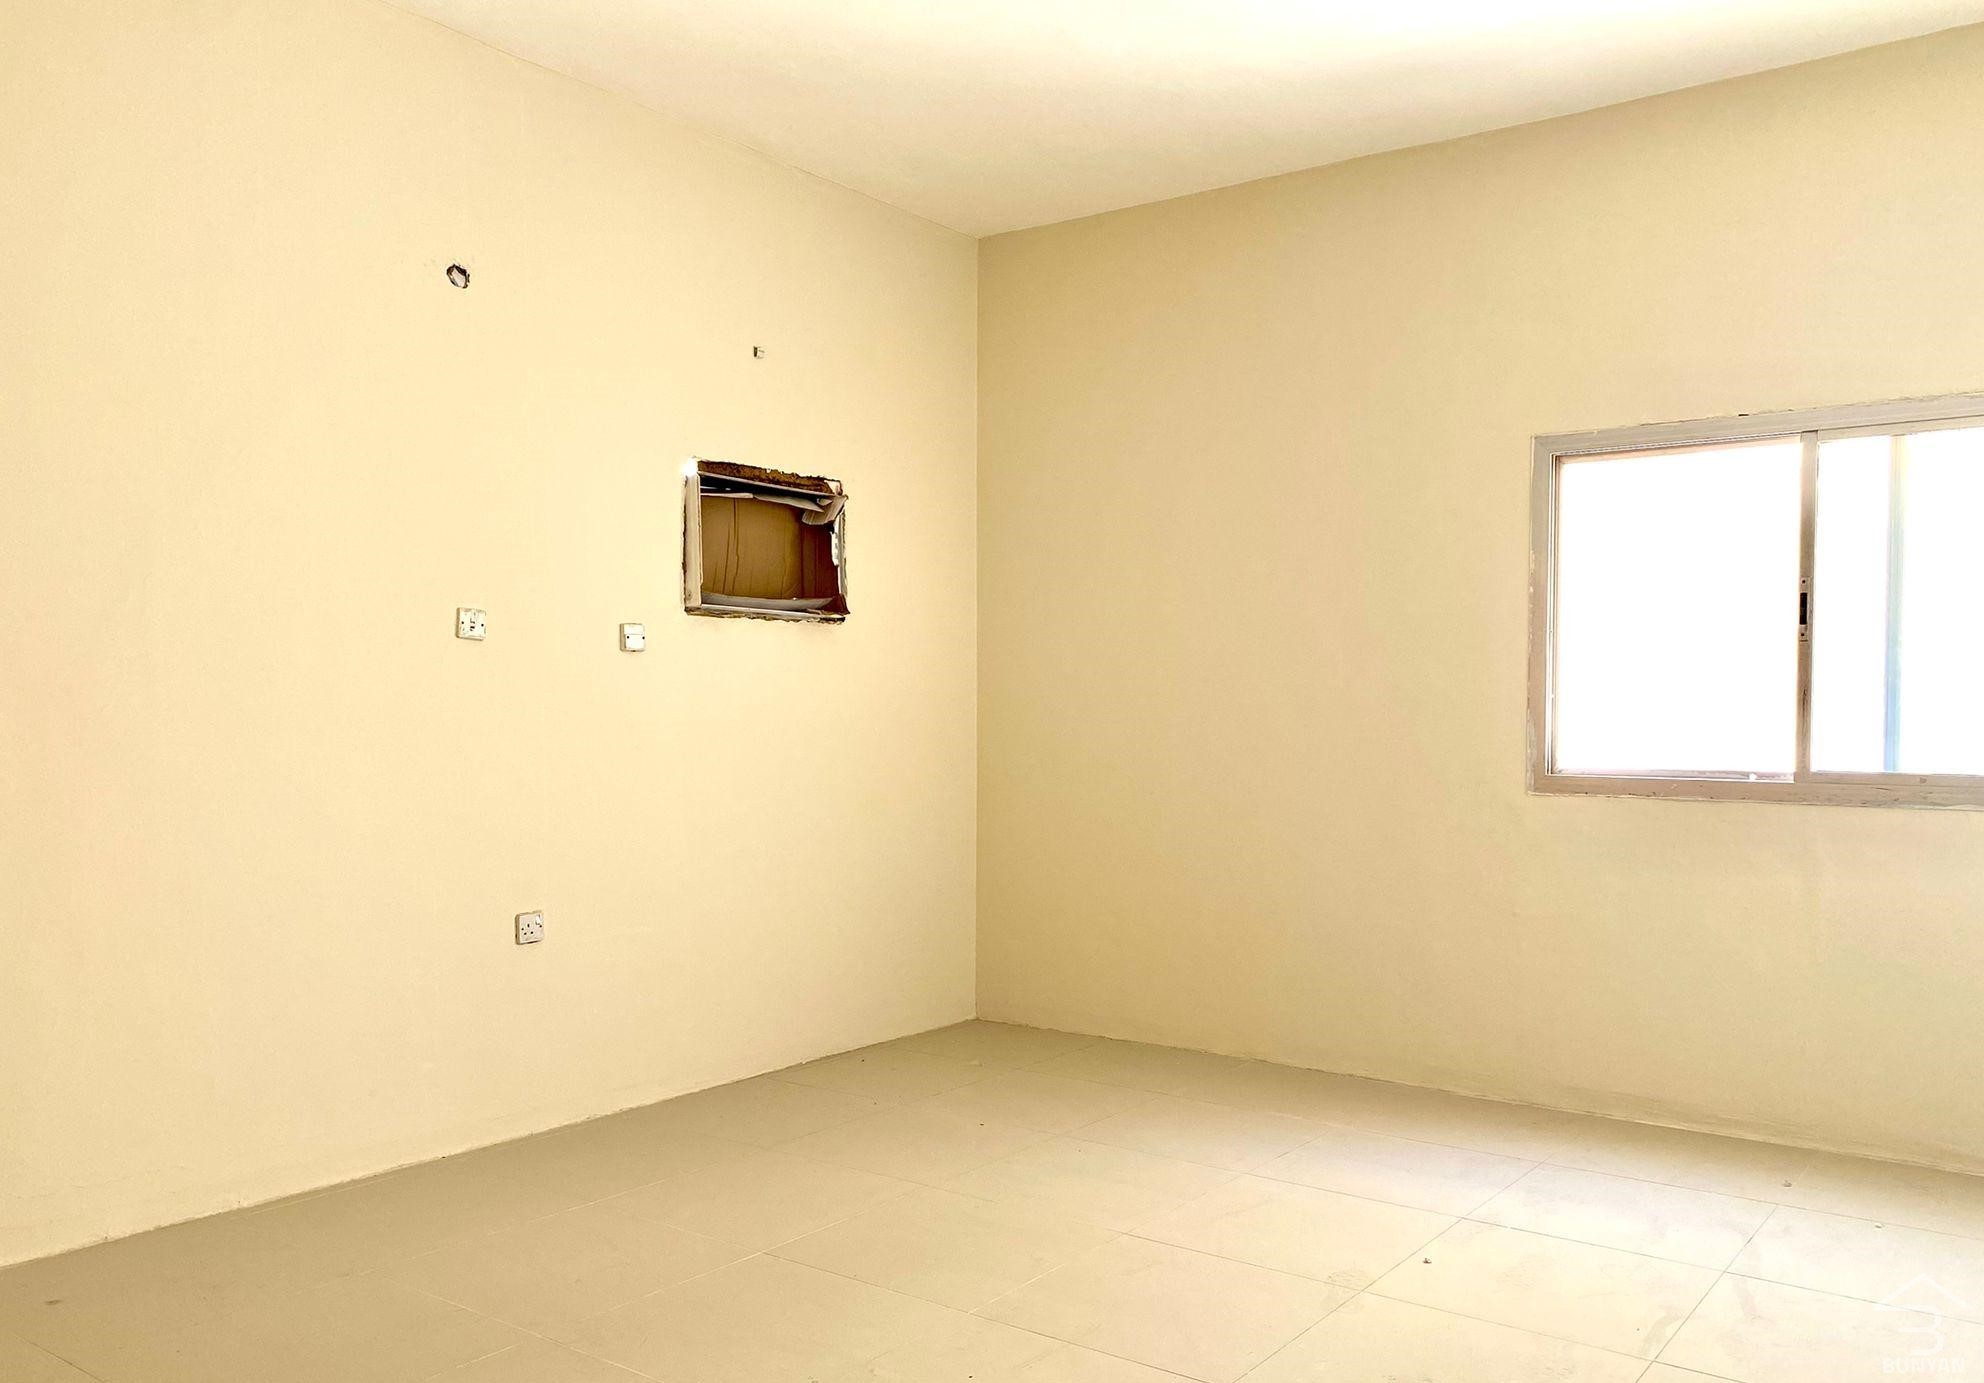 Flat 2 Br AVAILABLE IN MUNTAZAH